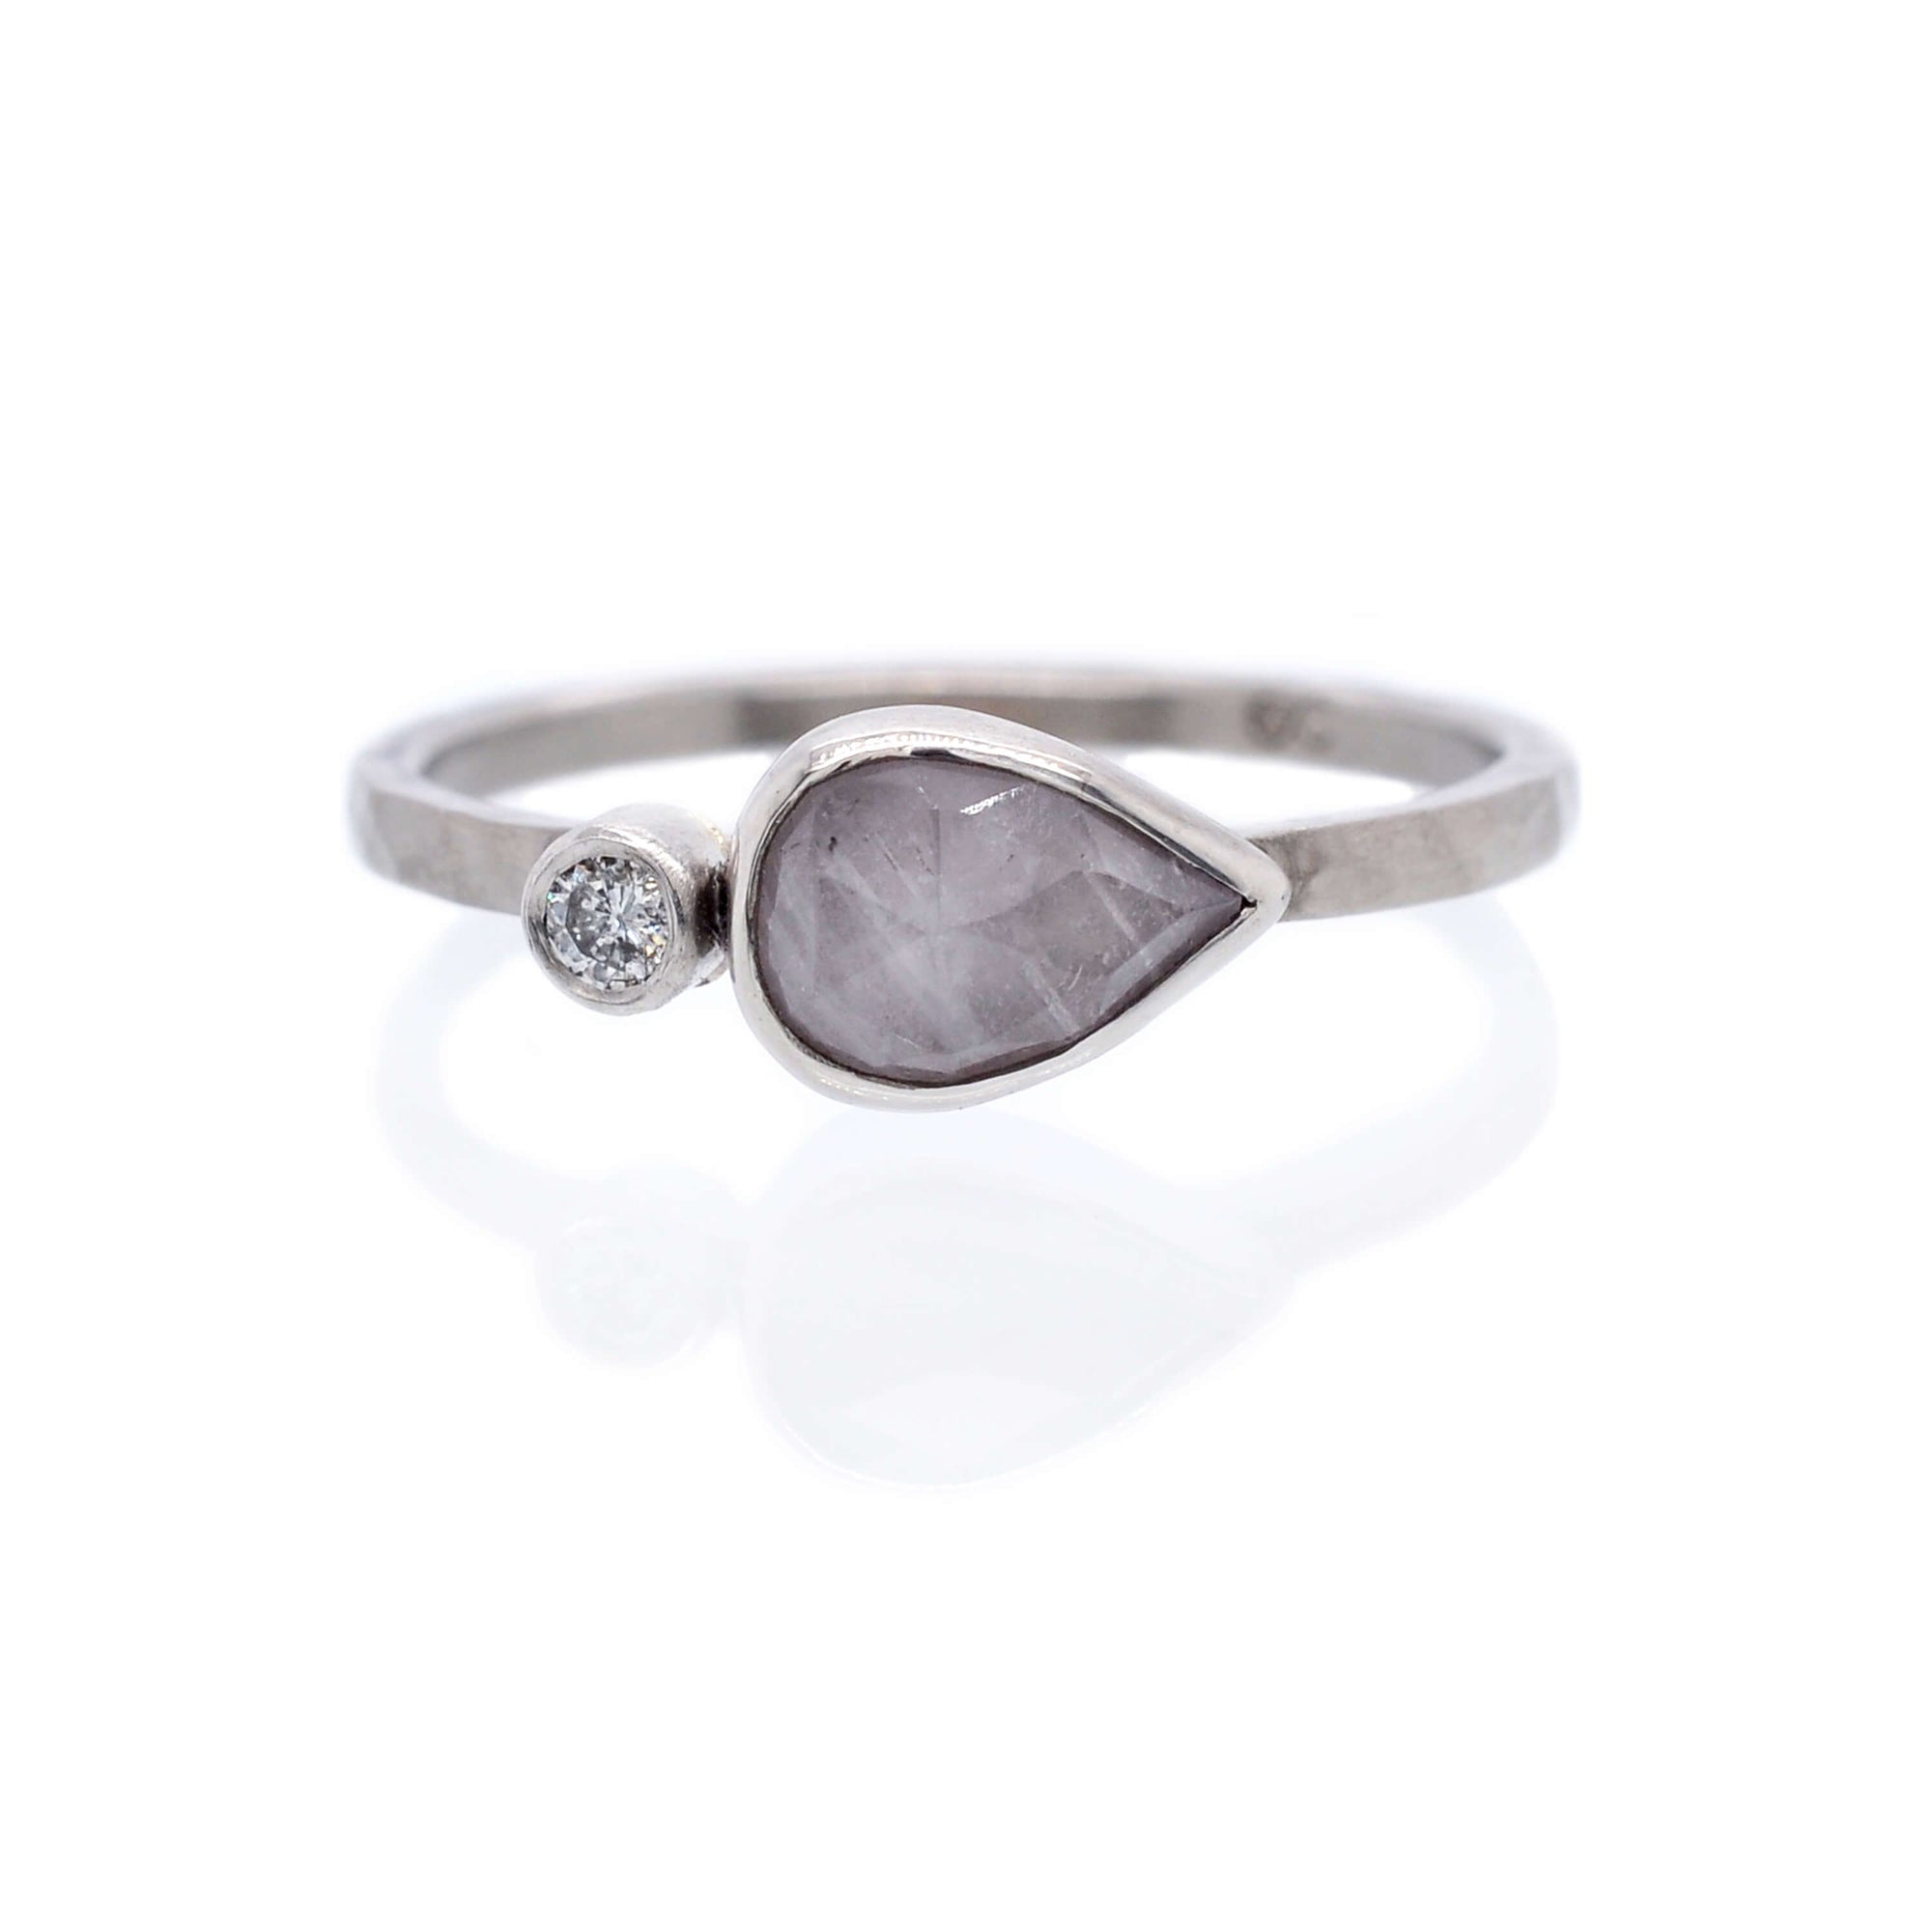 Icy gray diamond and sapphire ring. Handmade by EC Design Jewelry in Minneapolis, MN. This ring was made with recycled metal and conflict-free stones.